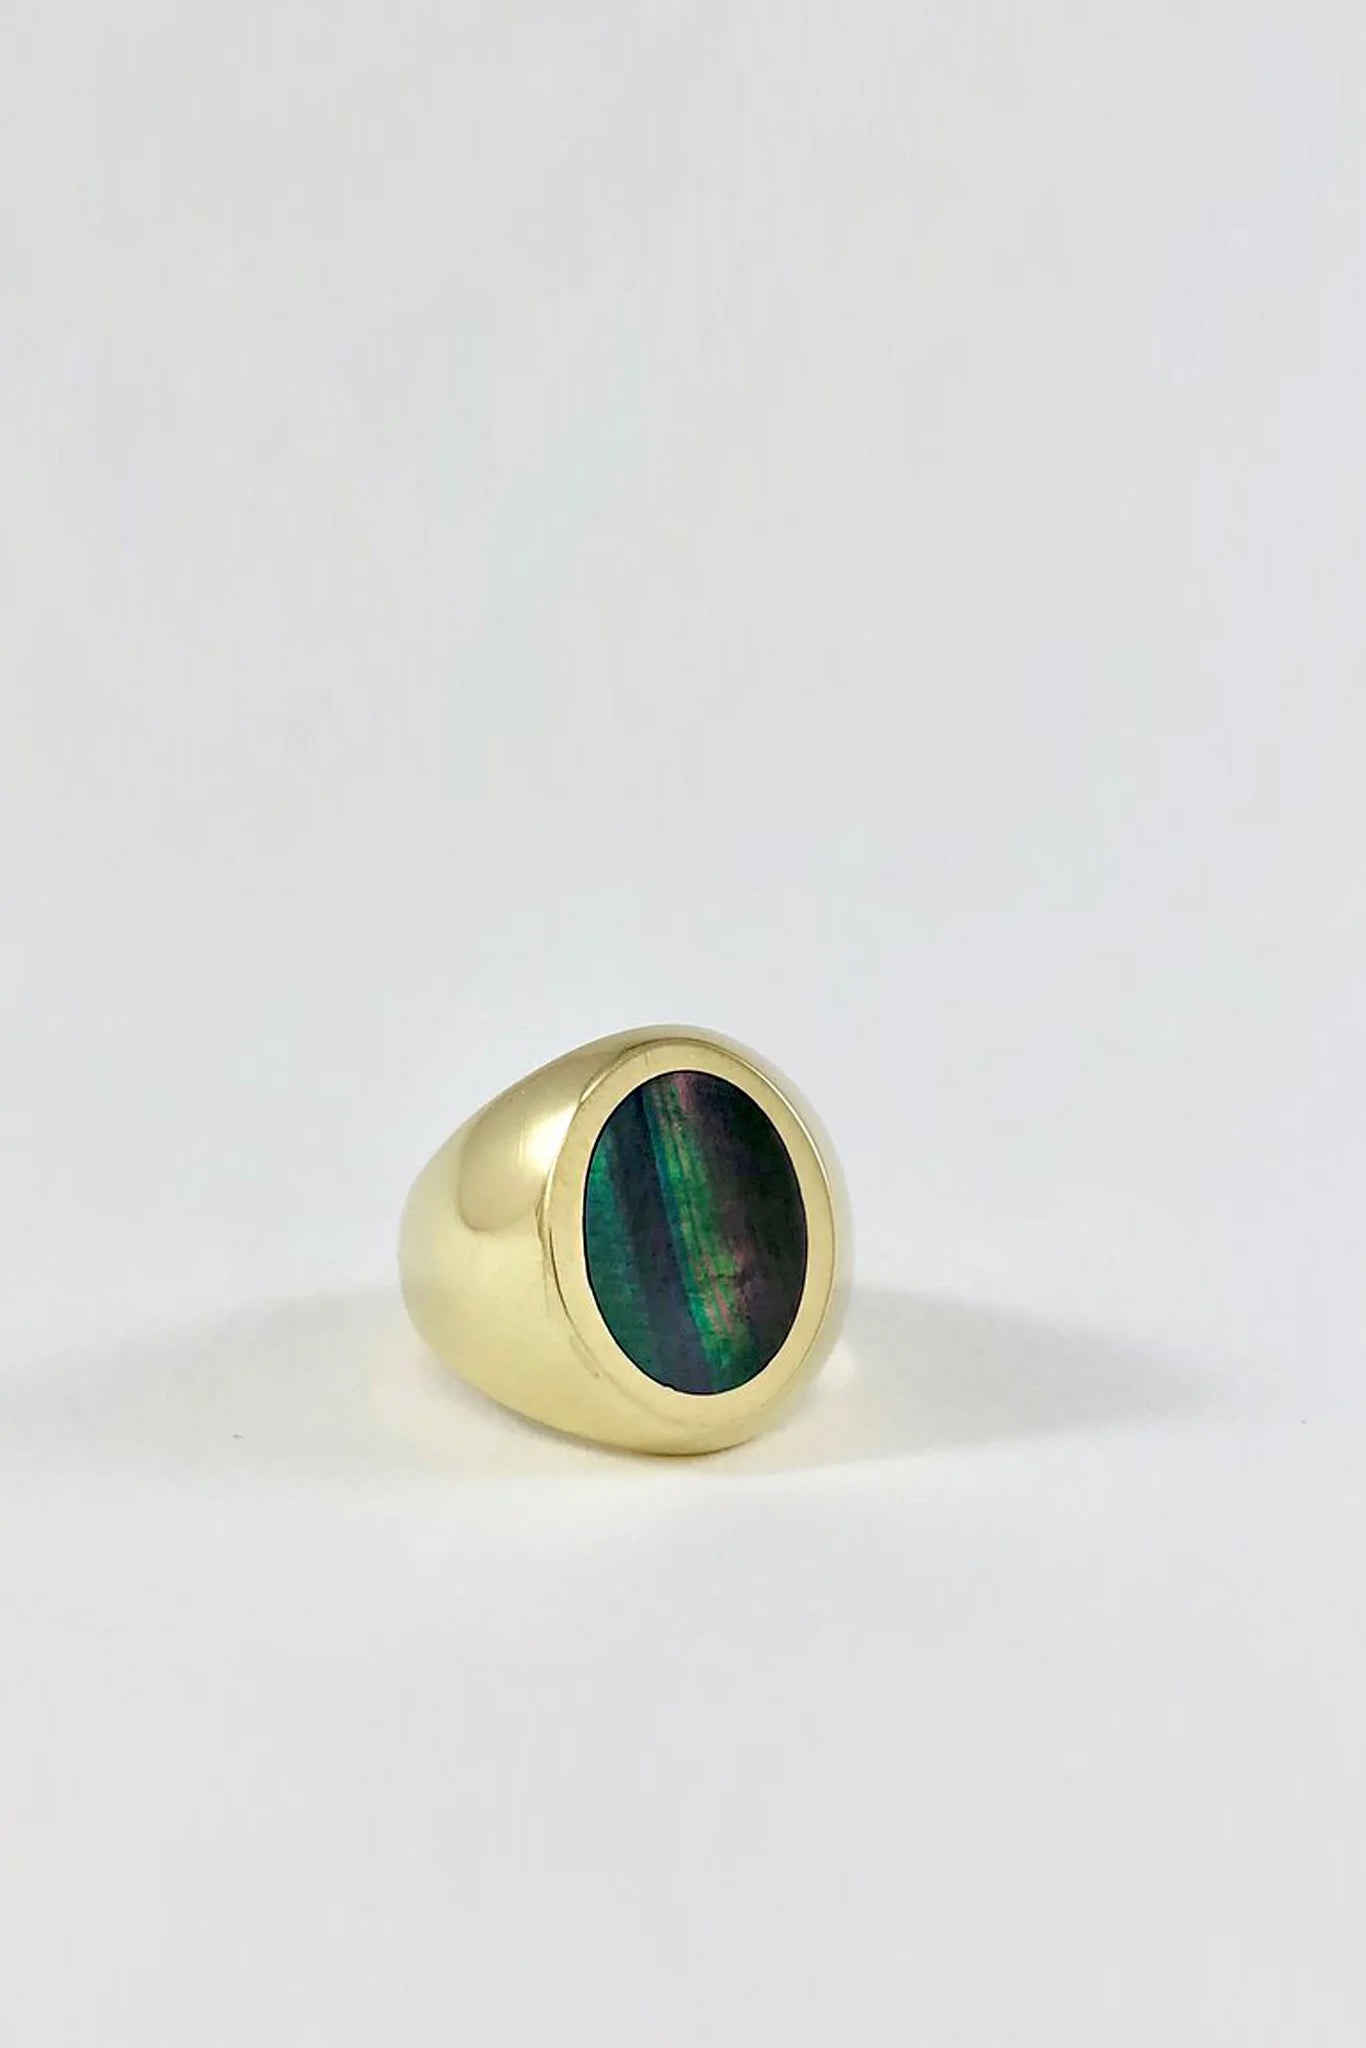 Brass Black Mother of Pearl Signet Ring - Oval